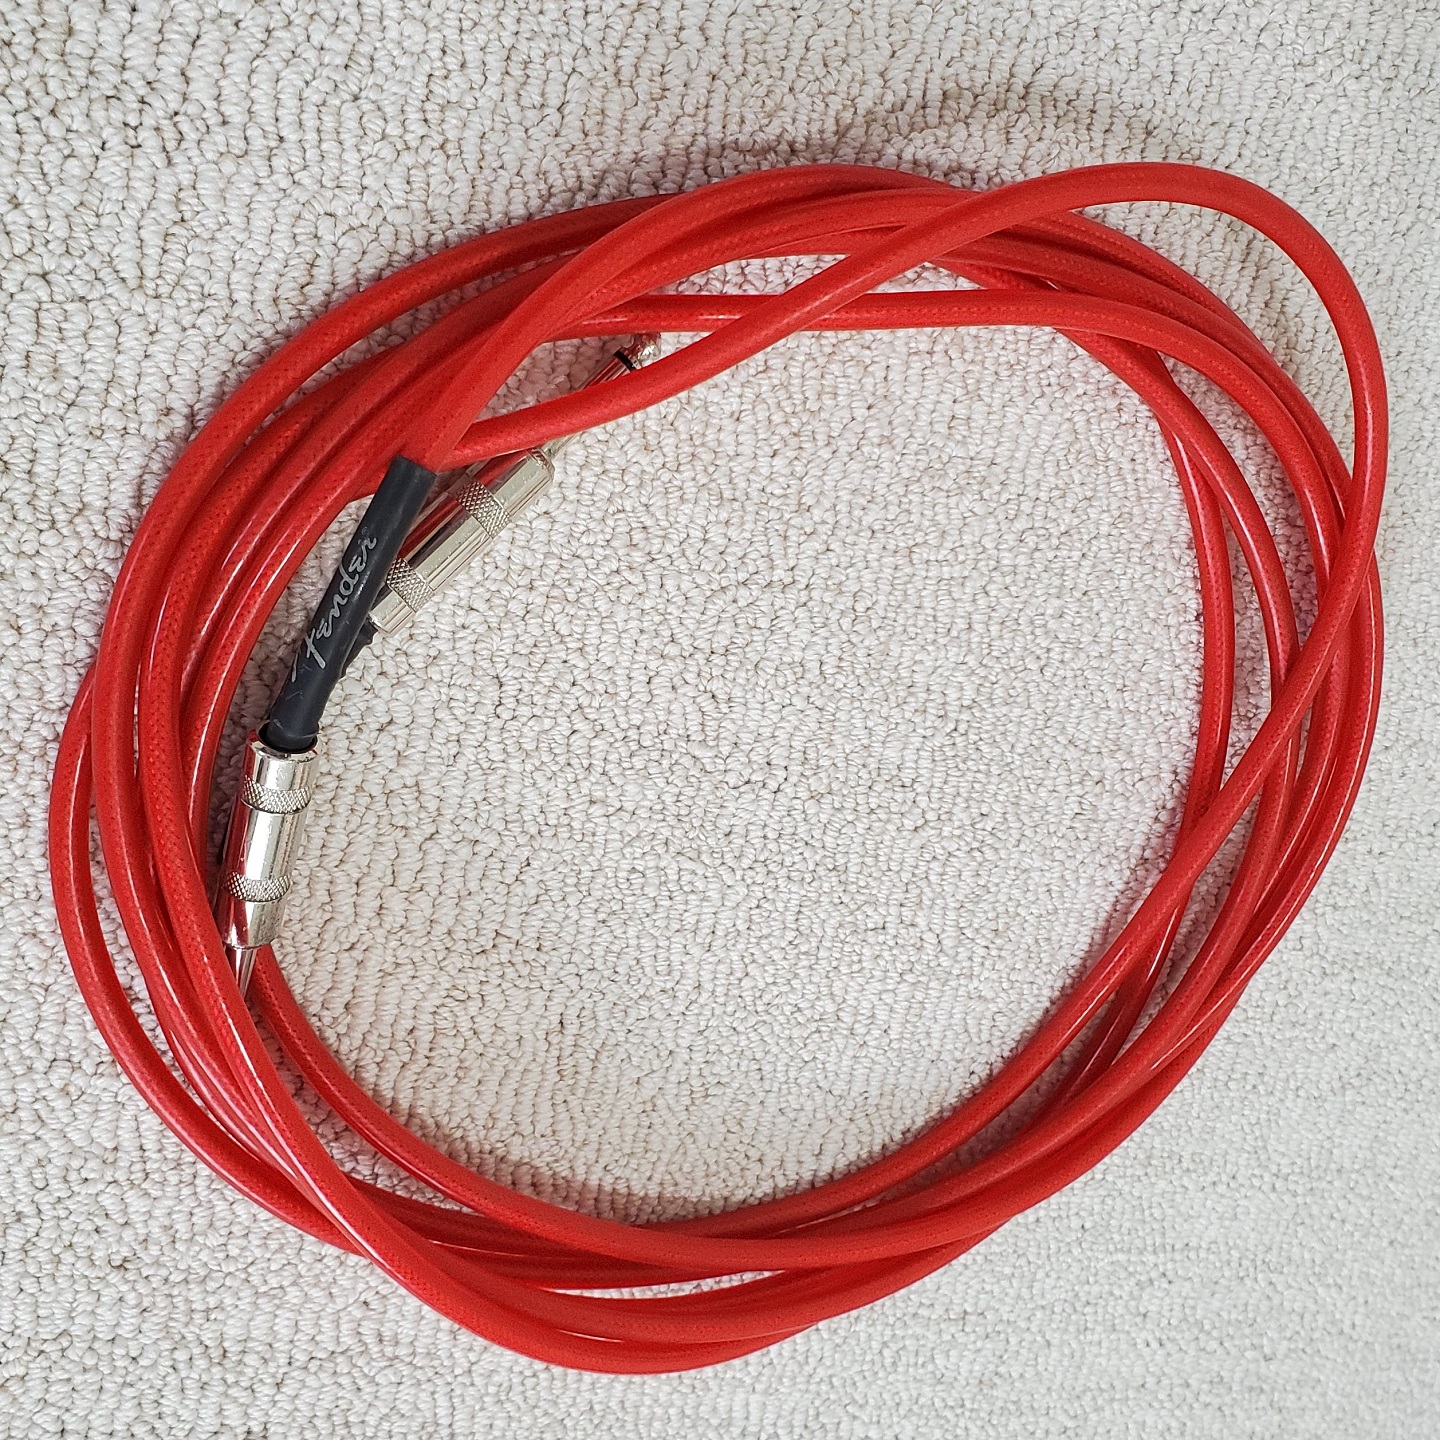 Fender California Series Instrument Cable for electric guitar, bass guitar, electric mandolin, pro audio - Fiesta Red - 15' 